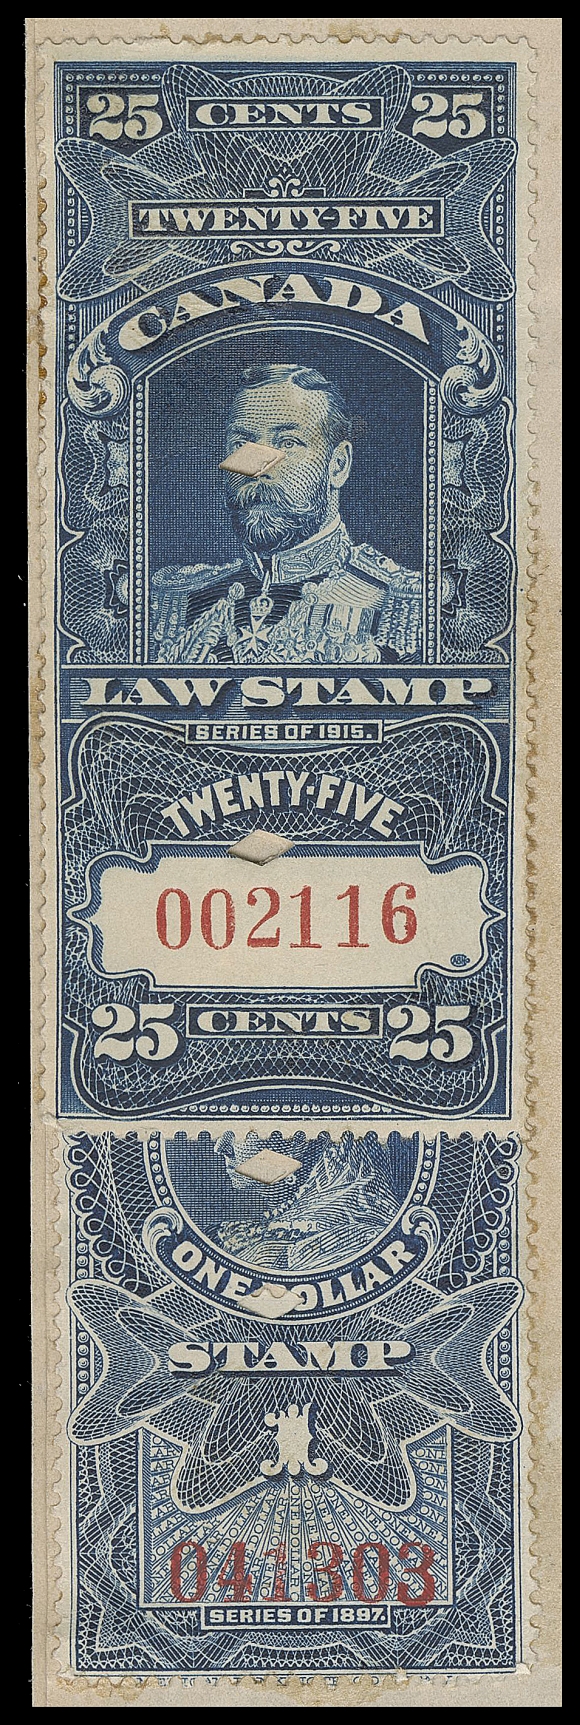 CANADA REVENUES (FEDERAL)  FSC8, 15,Two regular Supreme Court singles (serial numbers "041303" and "002116") used instead of "IN PRIZE" overprints; punch cancelled to "The Oregon" document, Exchequer Court IN PRIZE handstamp with manuscript "Filed 4th March 1920", light horizontal fold on 25c, otherwise F-VF

Interestingly enough, both serial numbers "041303" and "002116" are reported on Zaluski